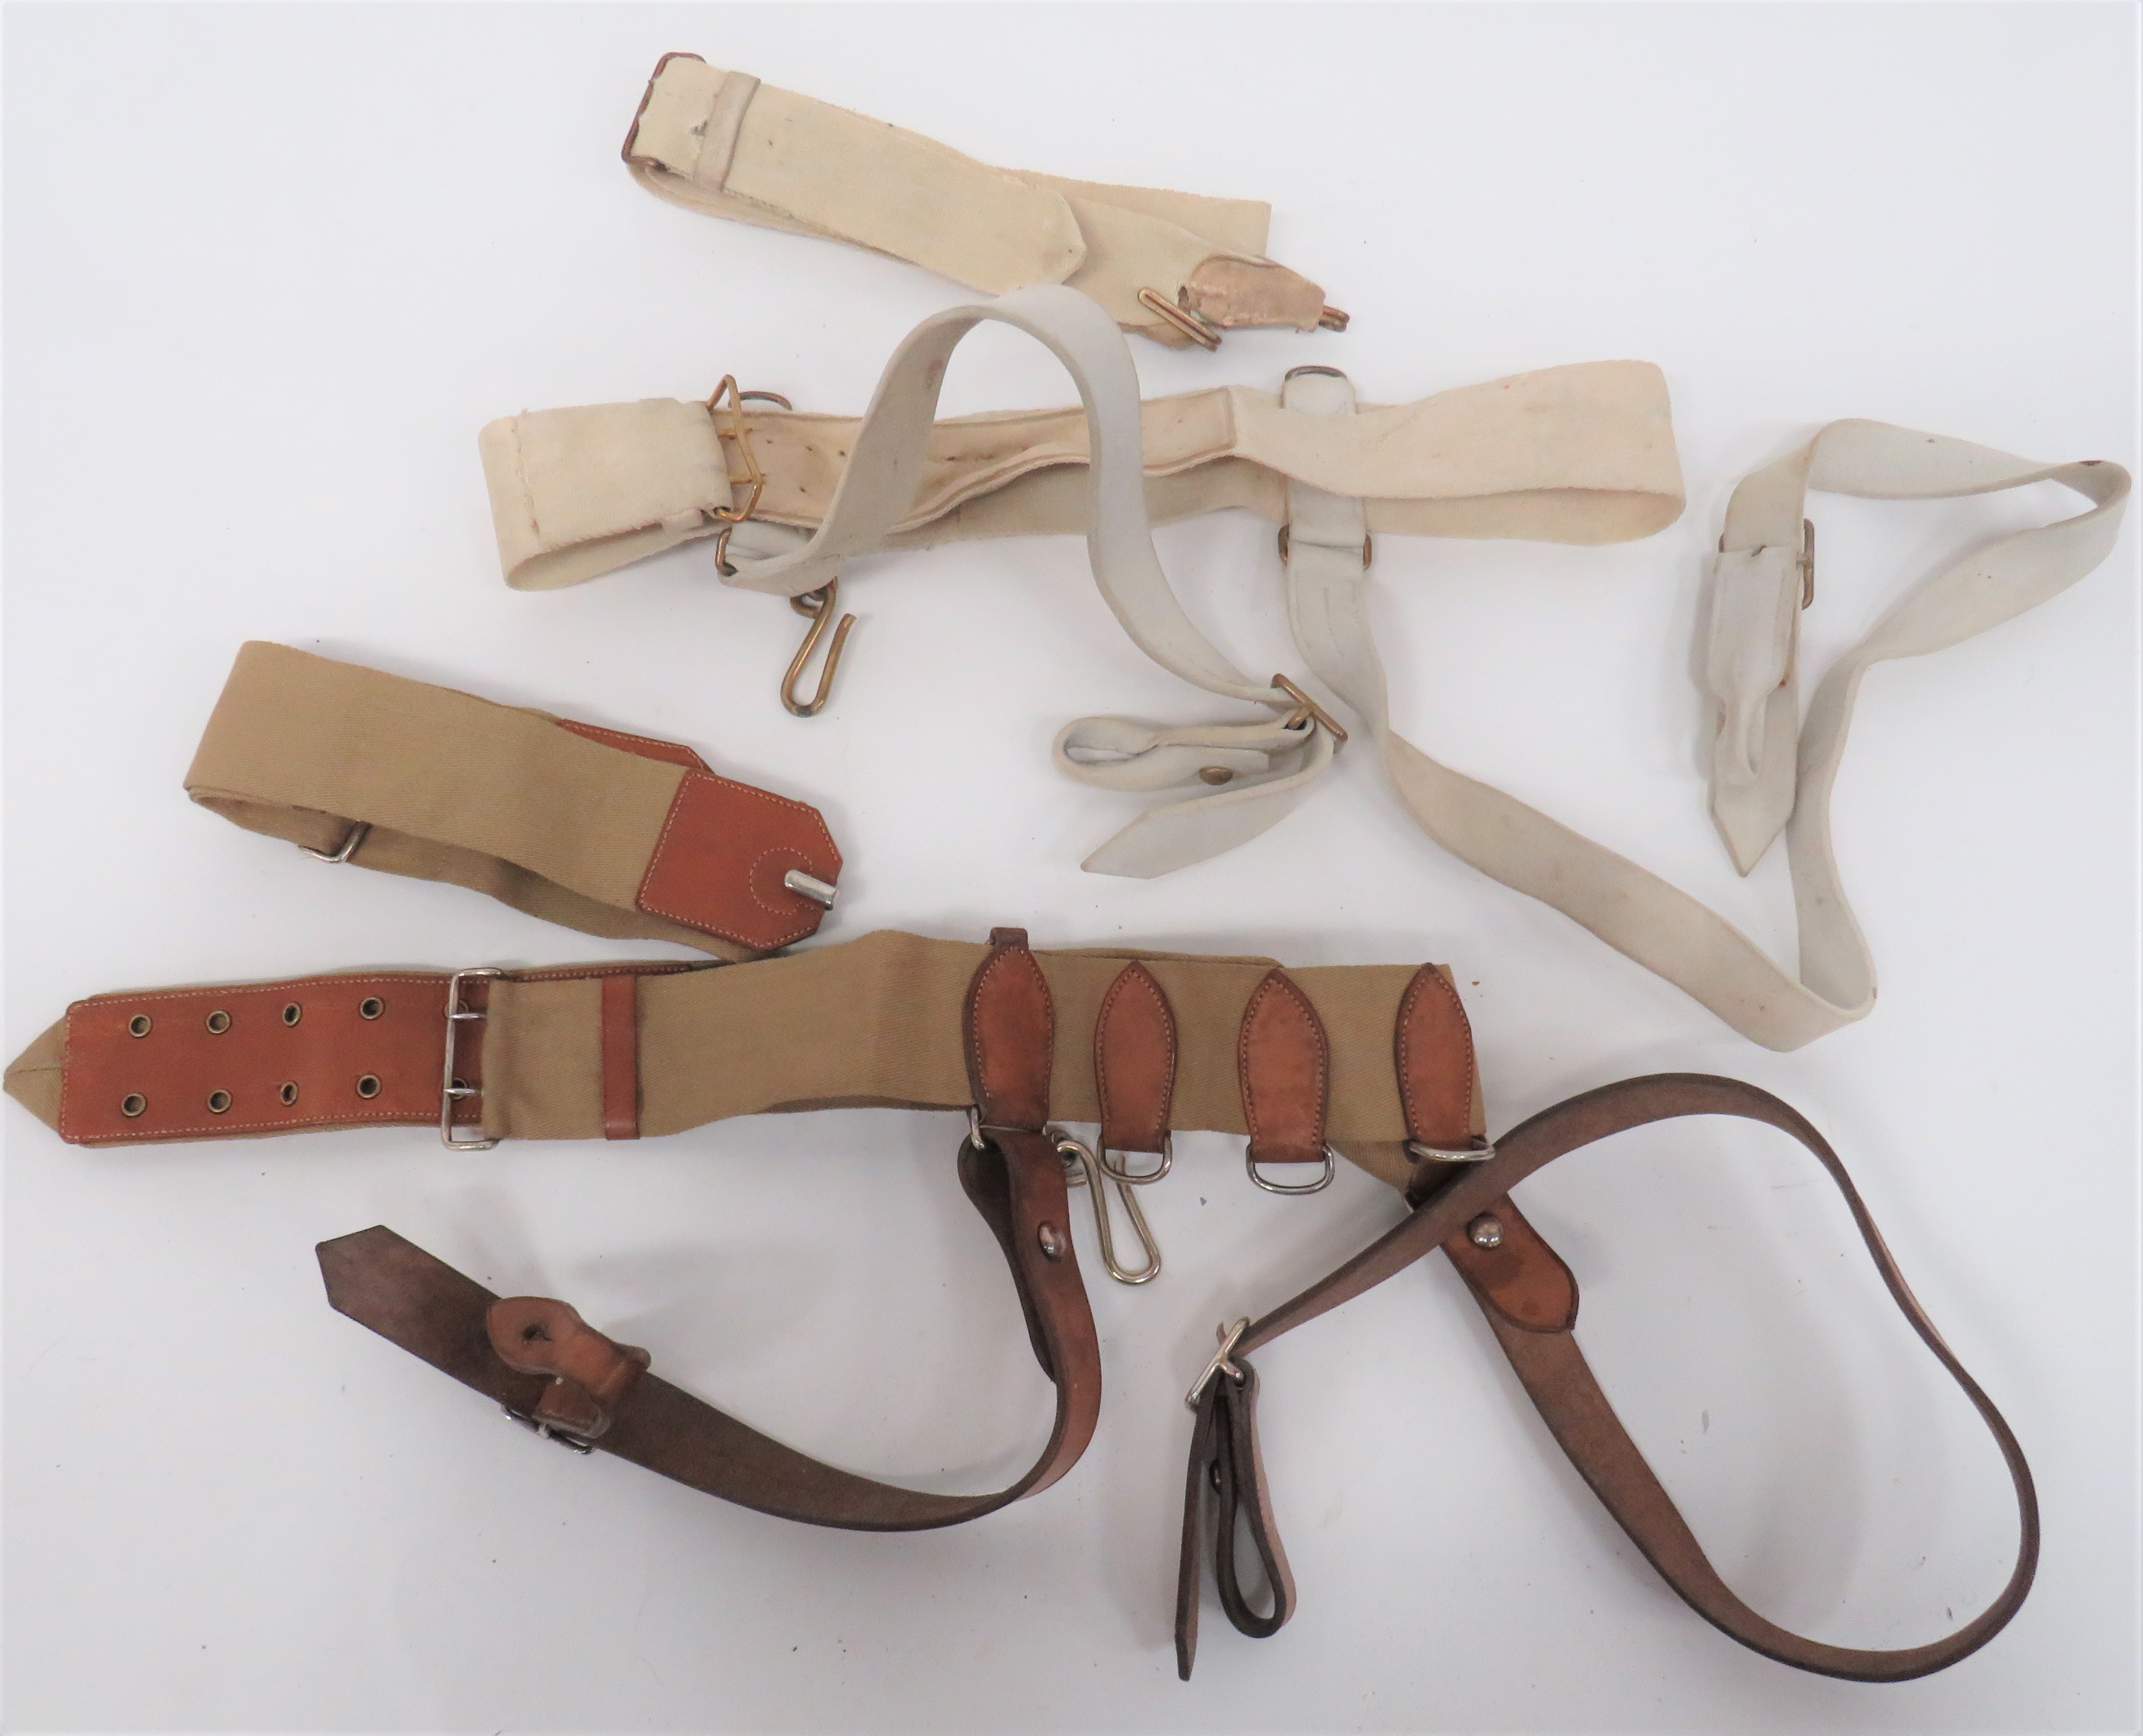 Two British Officer's Undress Sword Belts consisting white webbing belt with separate webbing